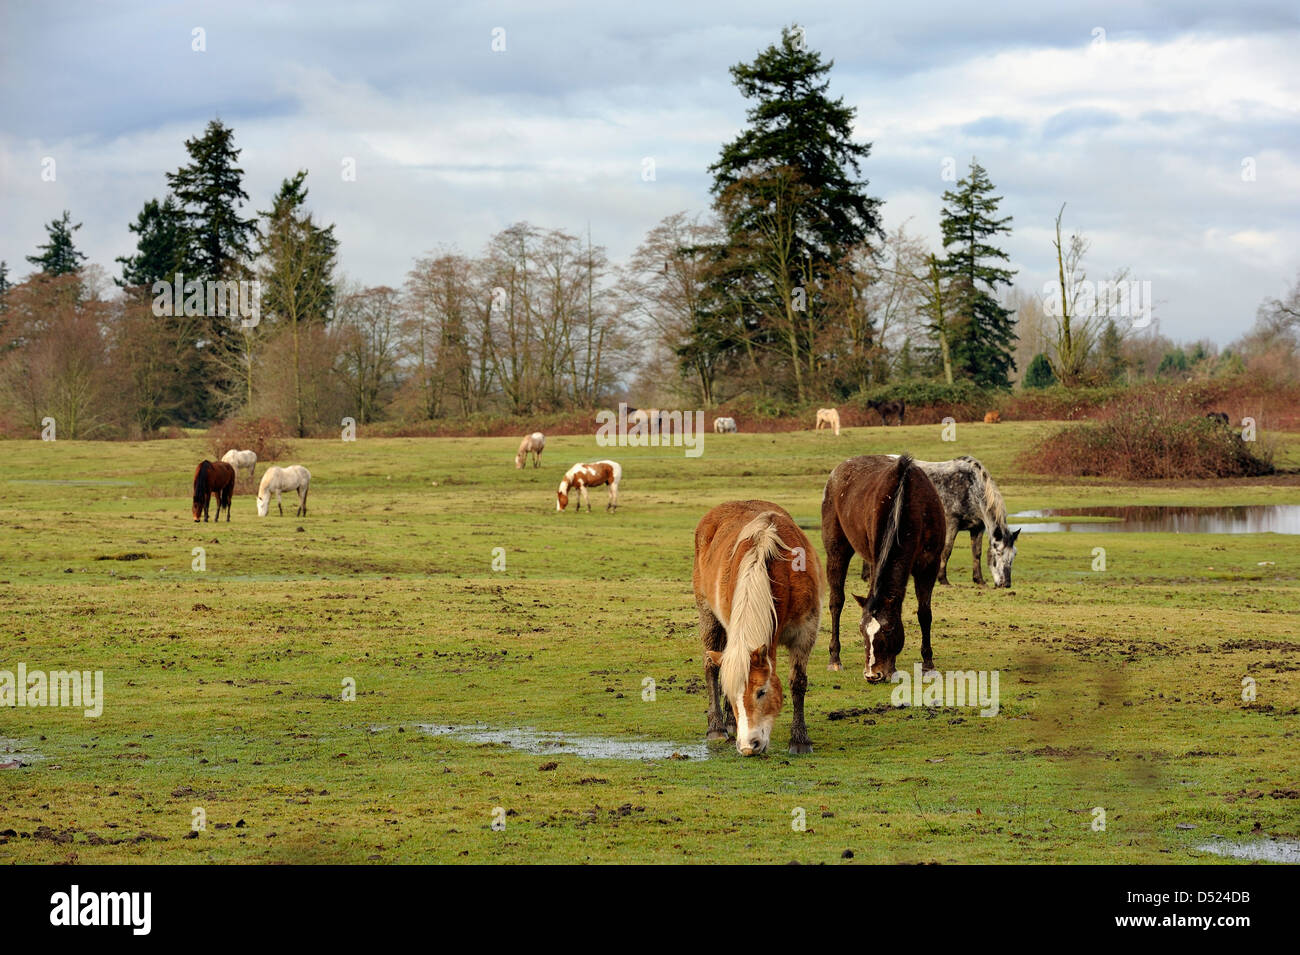 Horses grazing in a Pasture. Stock Photo